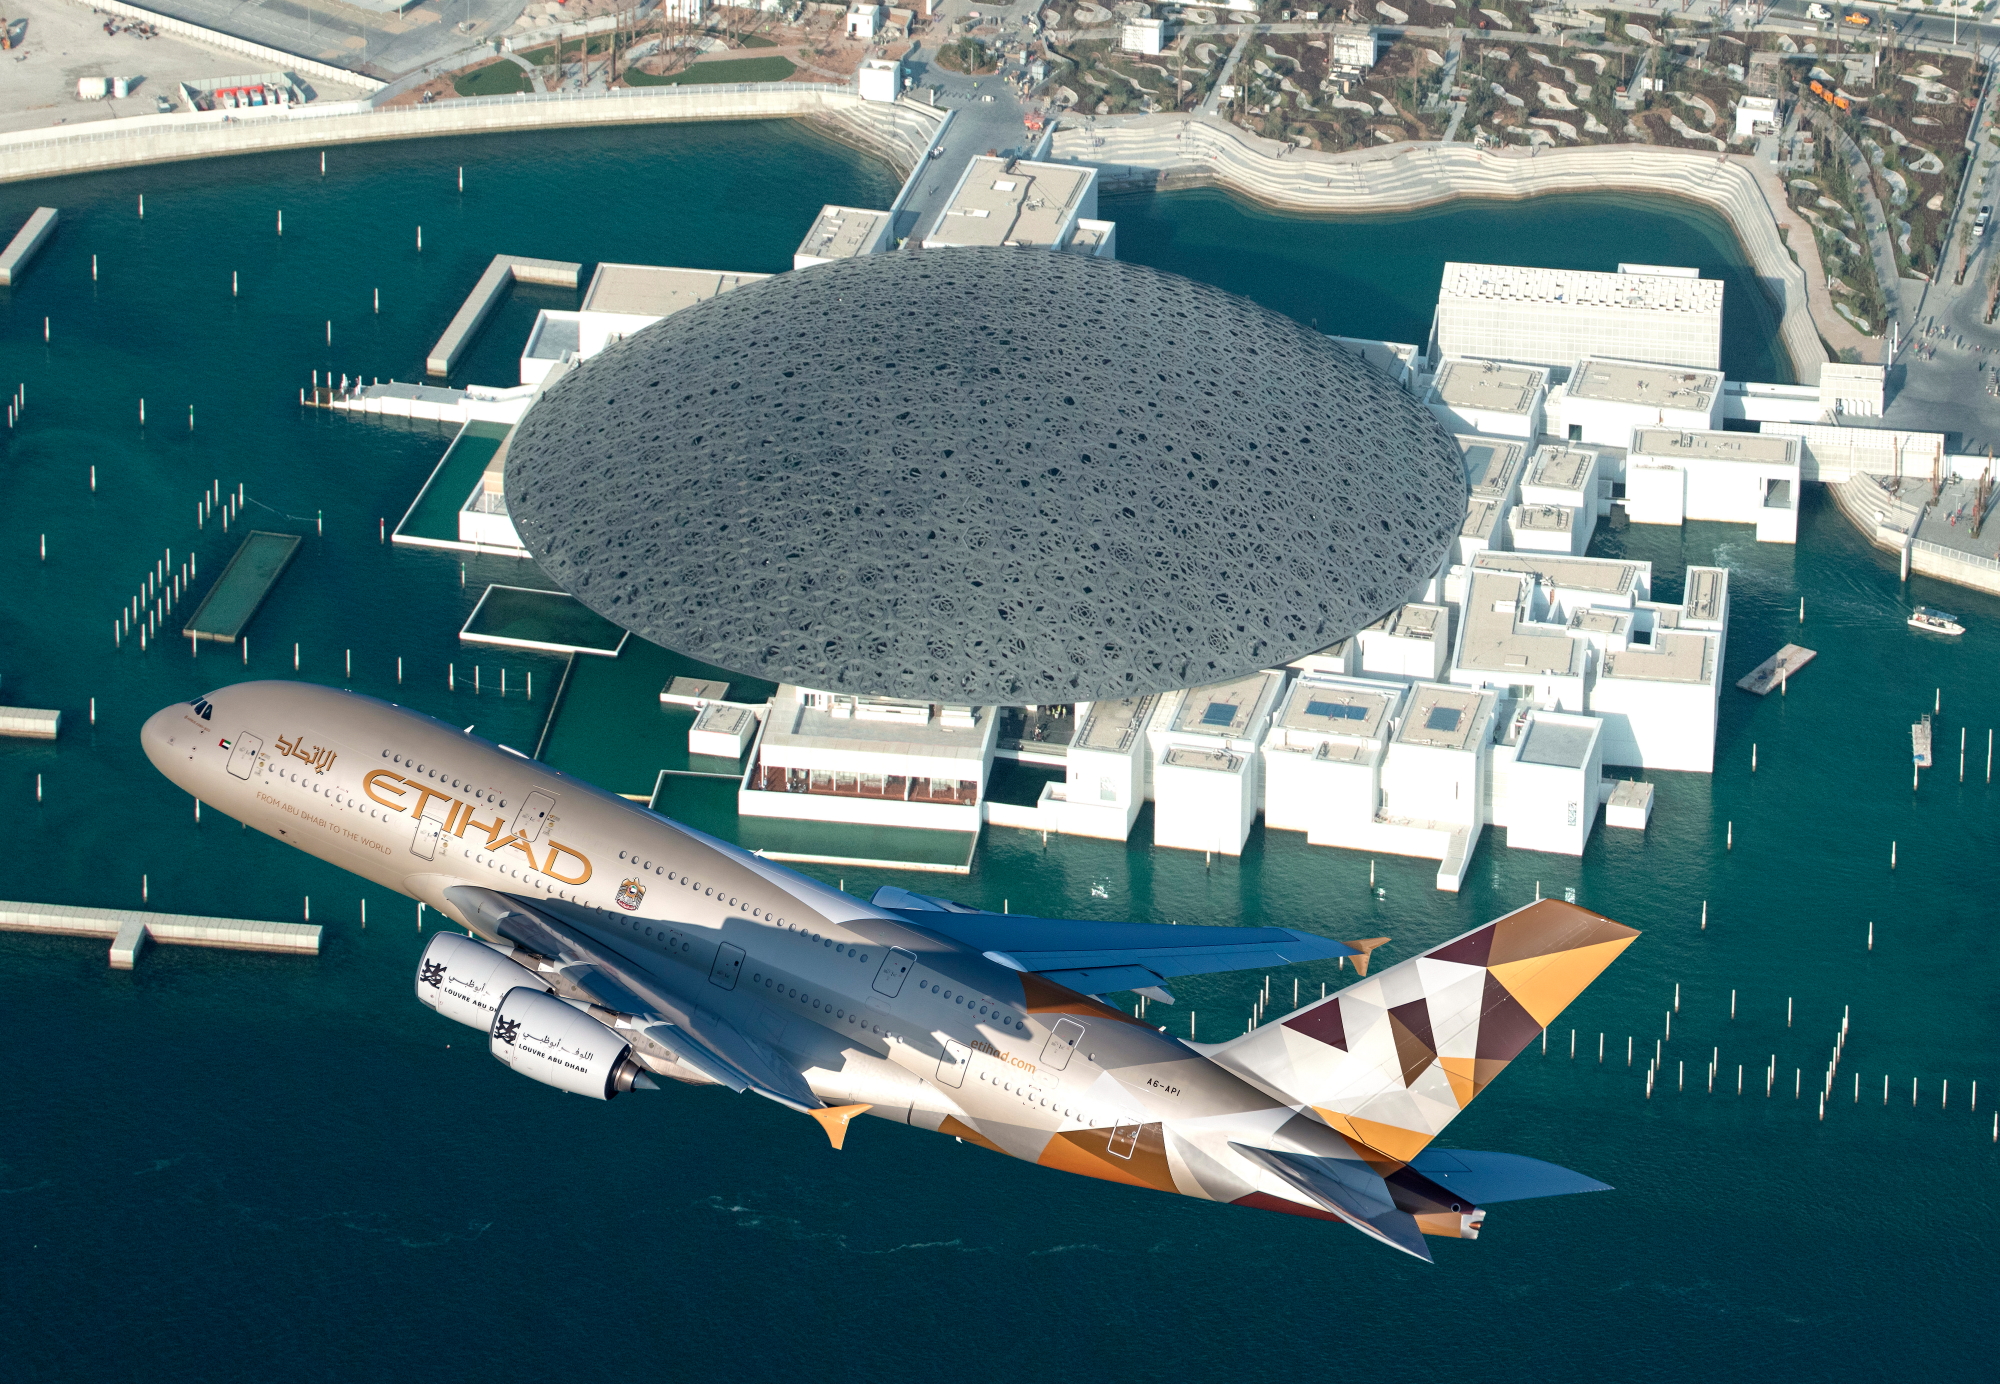 Etihad Airways celebrates opening of Louvre Abu Dhabi with Airbus A380 fly-by. Click to enlarge.